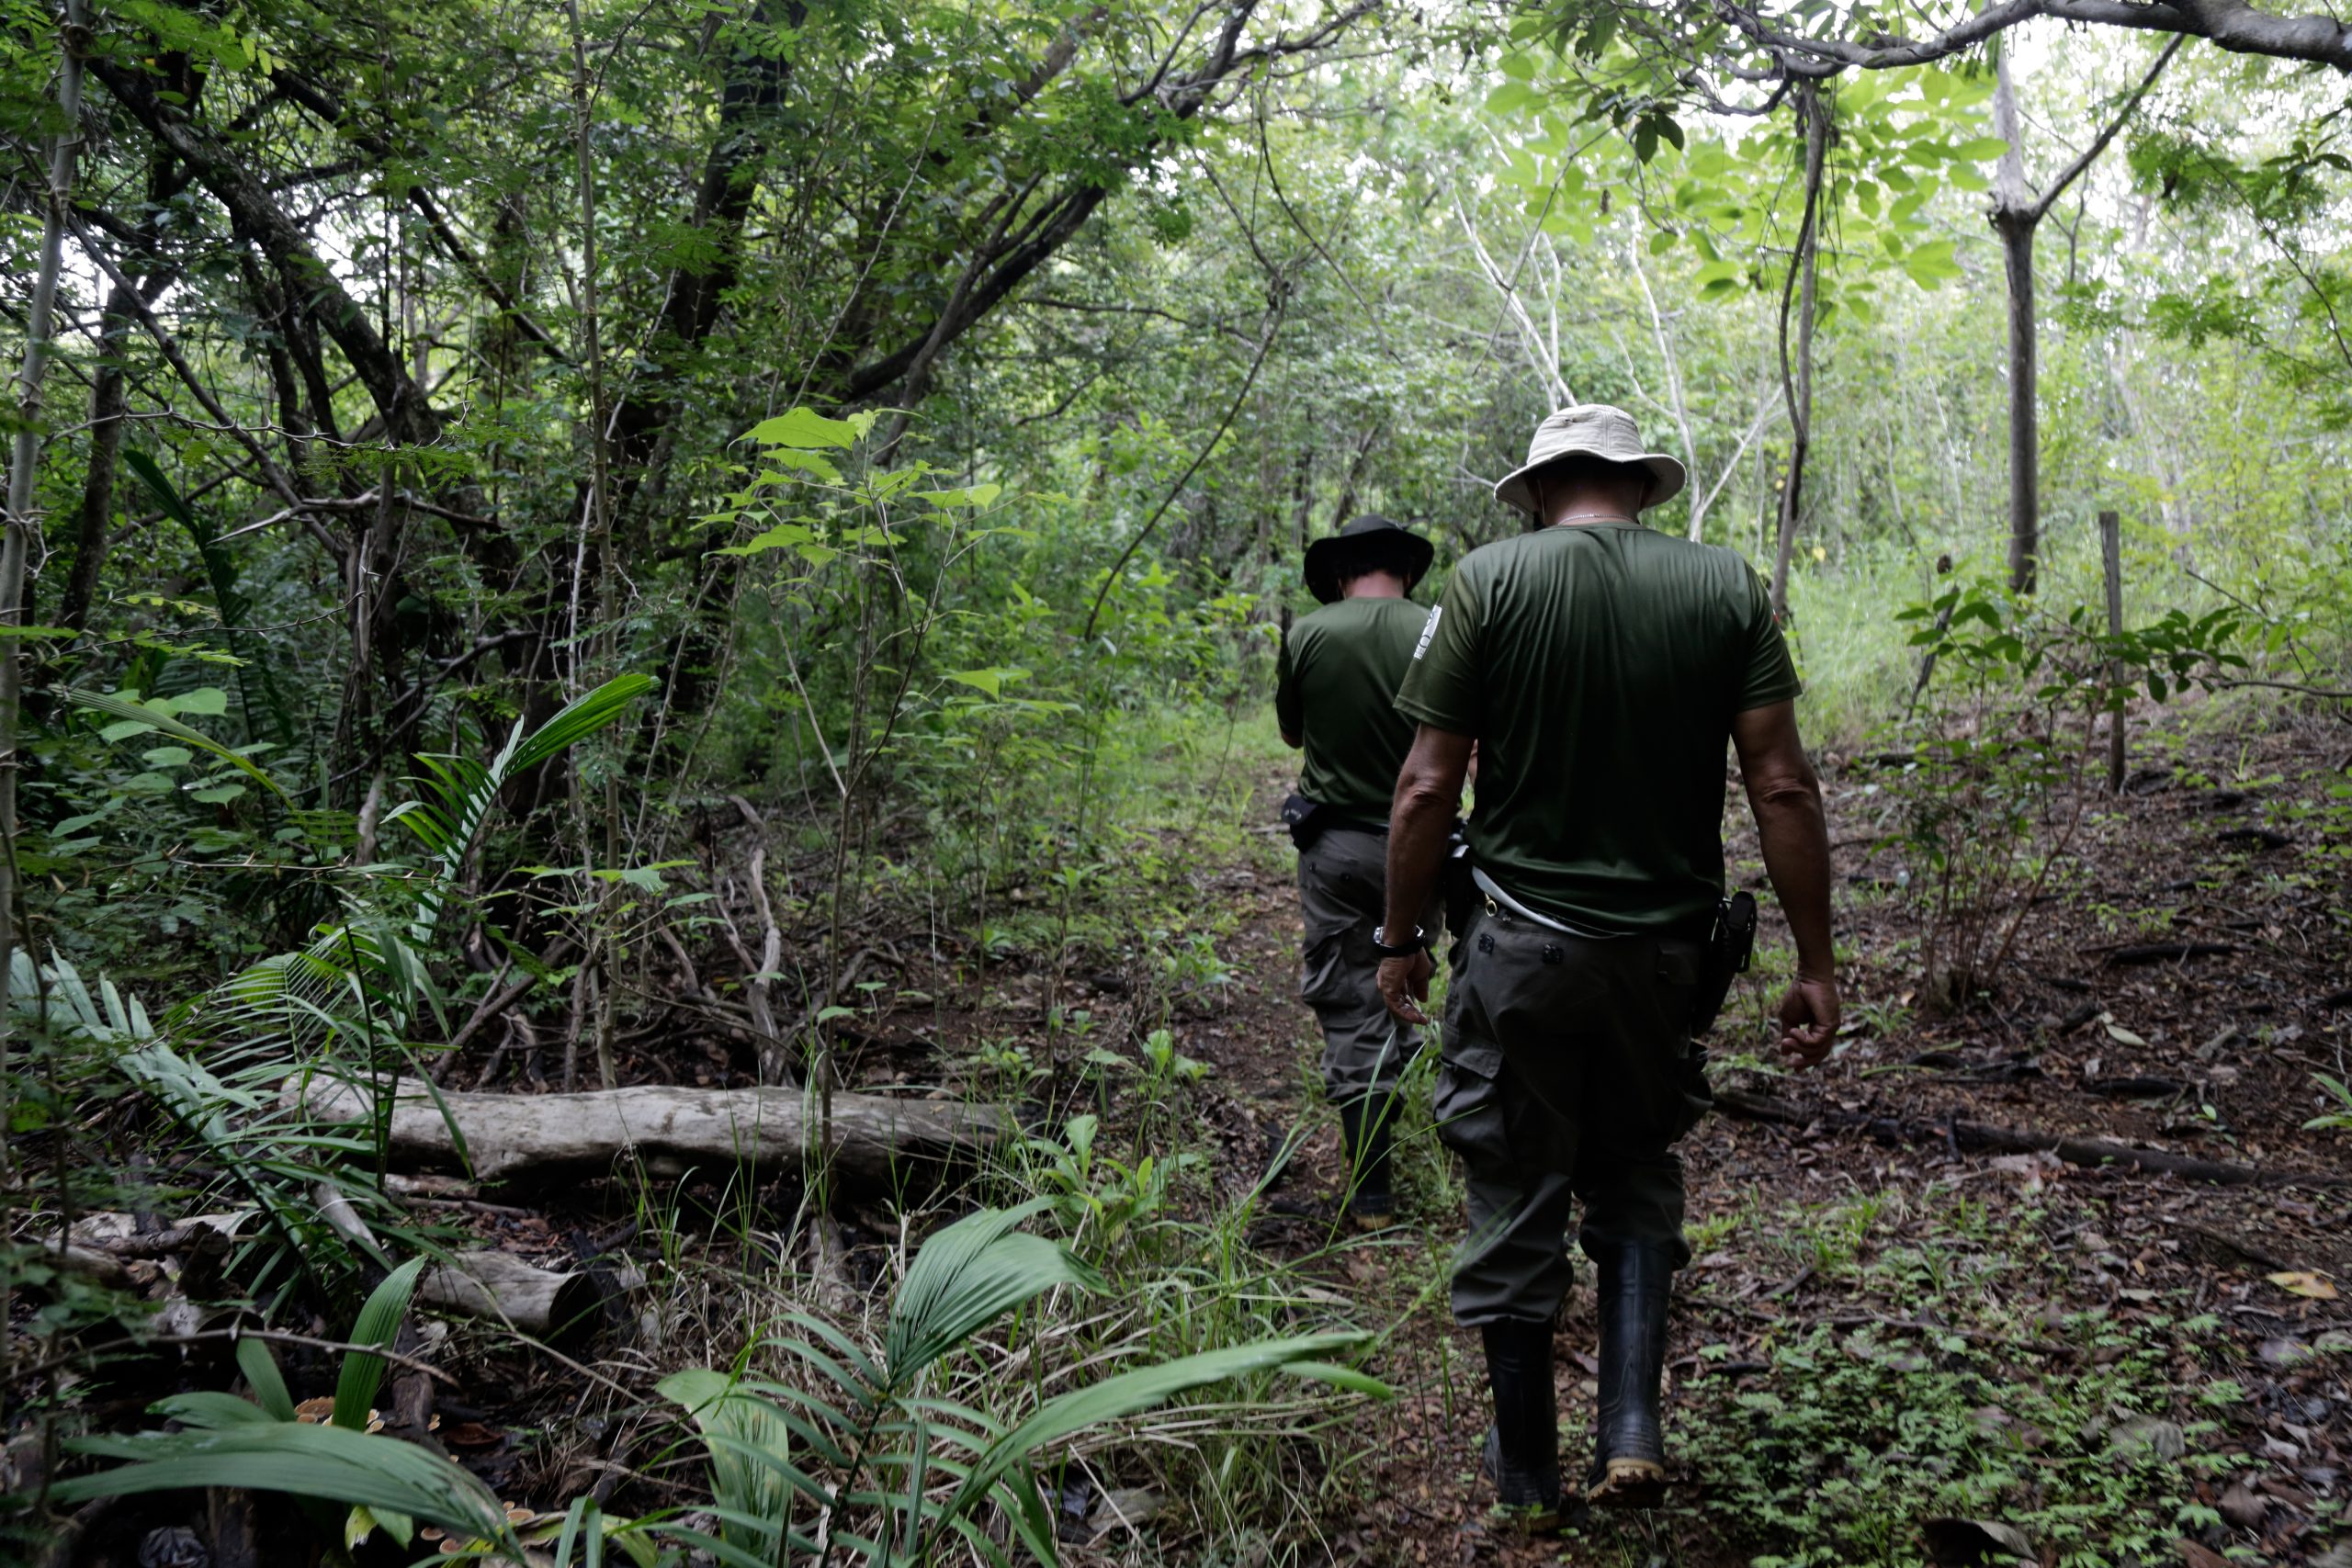 Manuel Alvarado (front) and Gelberth Obando (back) carry out a patrol through the dry forest of the Camaronal National Wildlife 